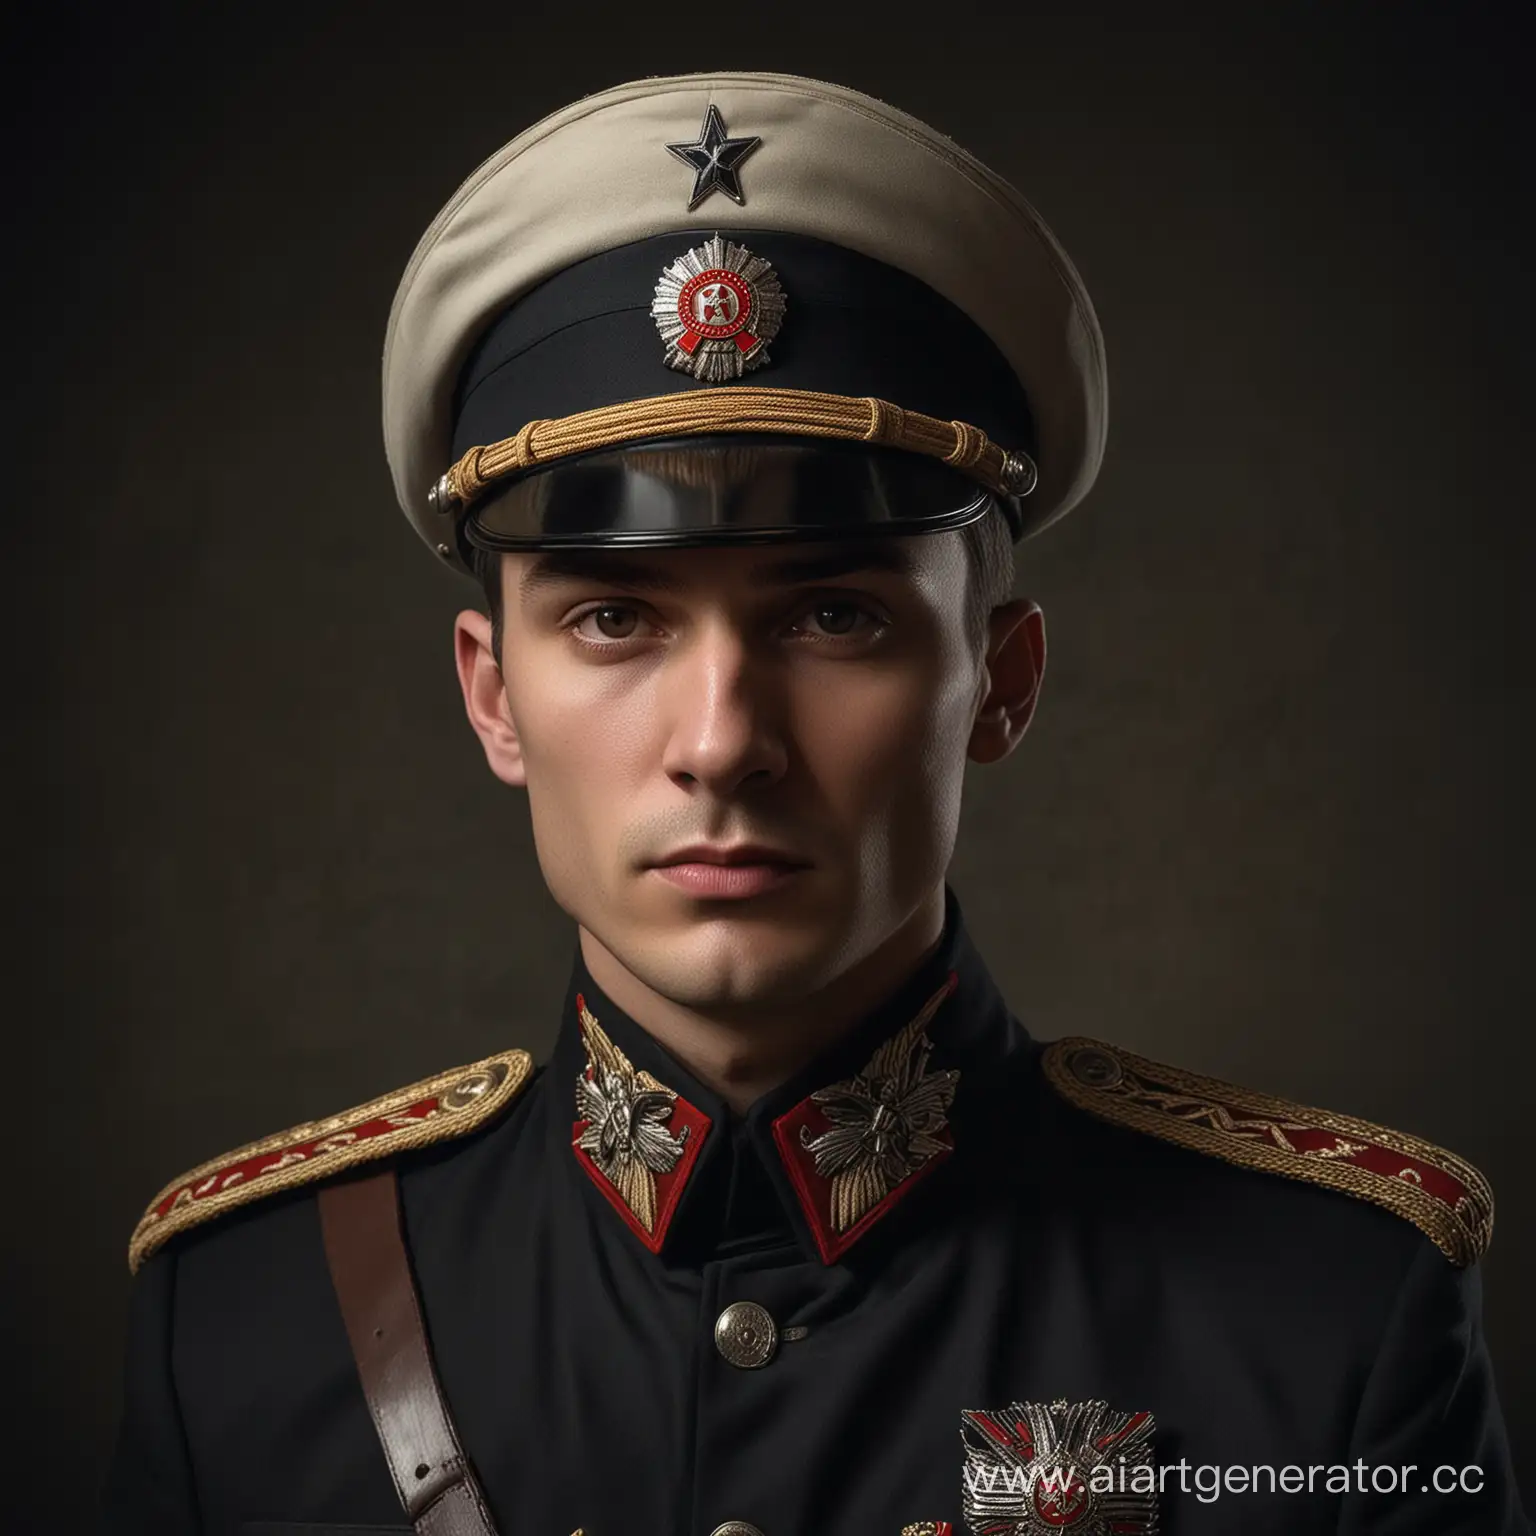 Mysterious-Slavic-Man-in-Russian-Officer-Uniform-with-Brown-Eyes